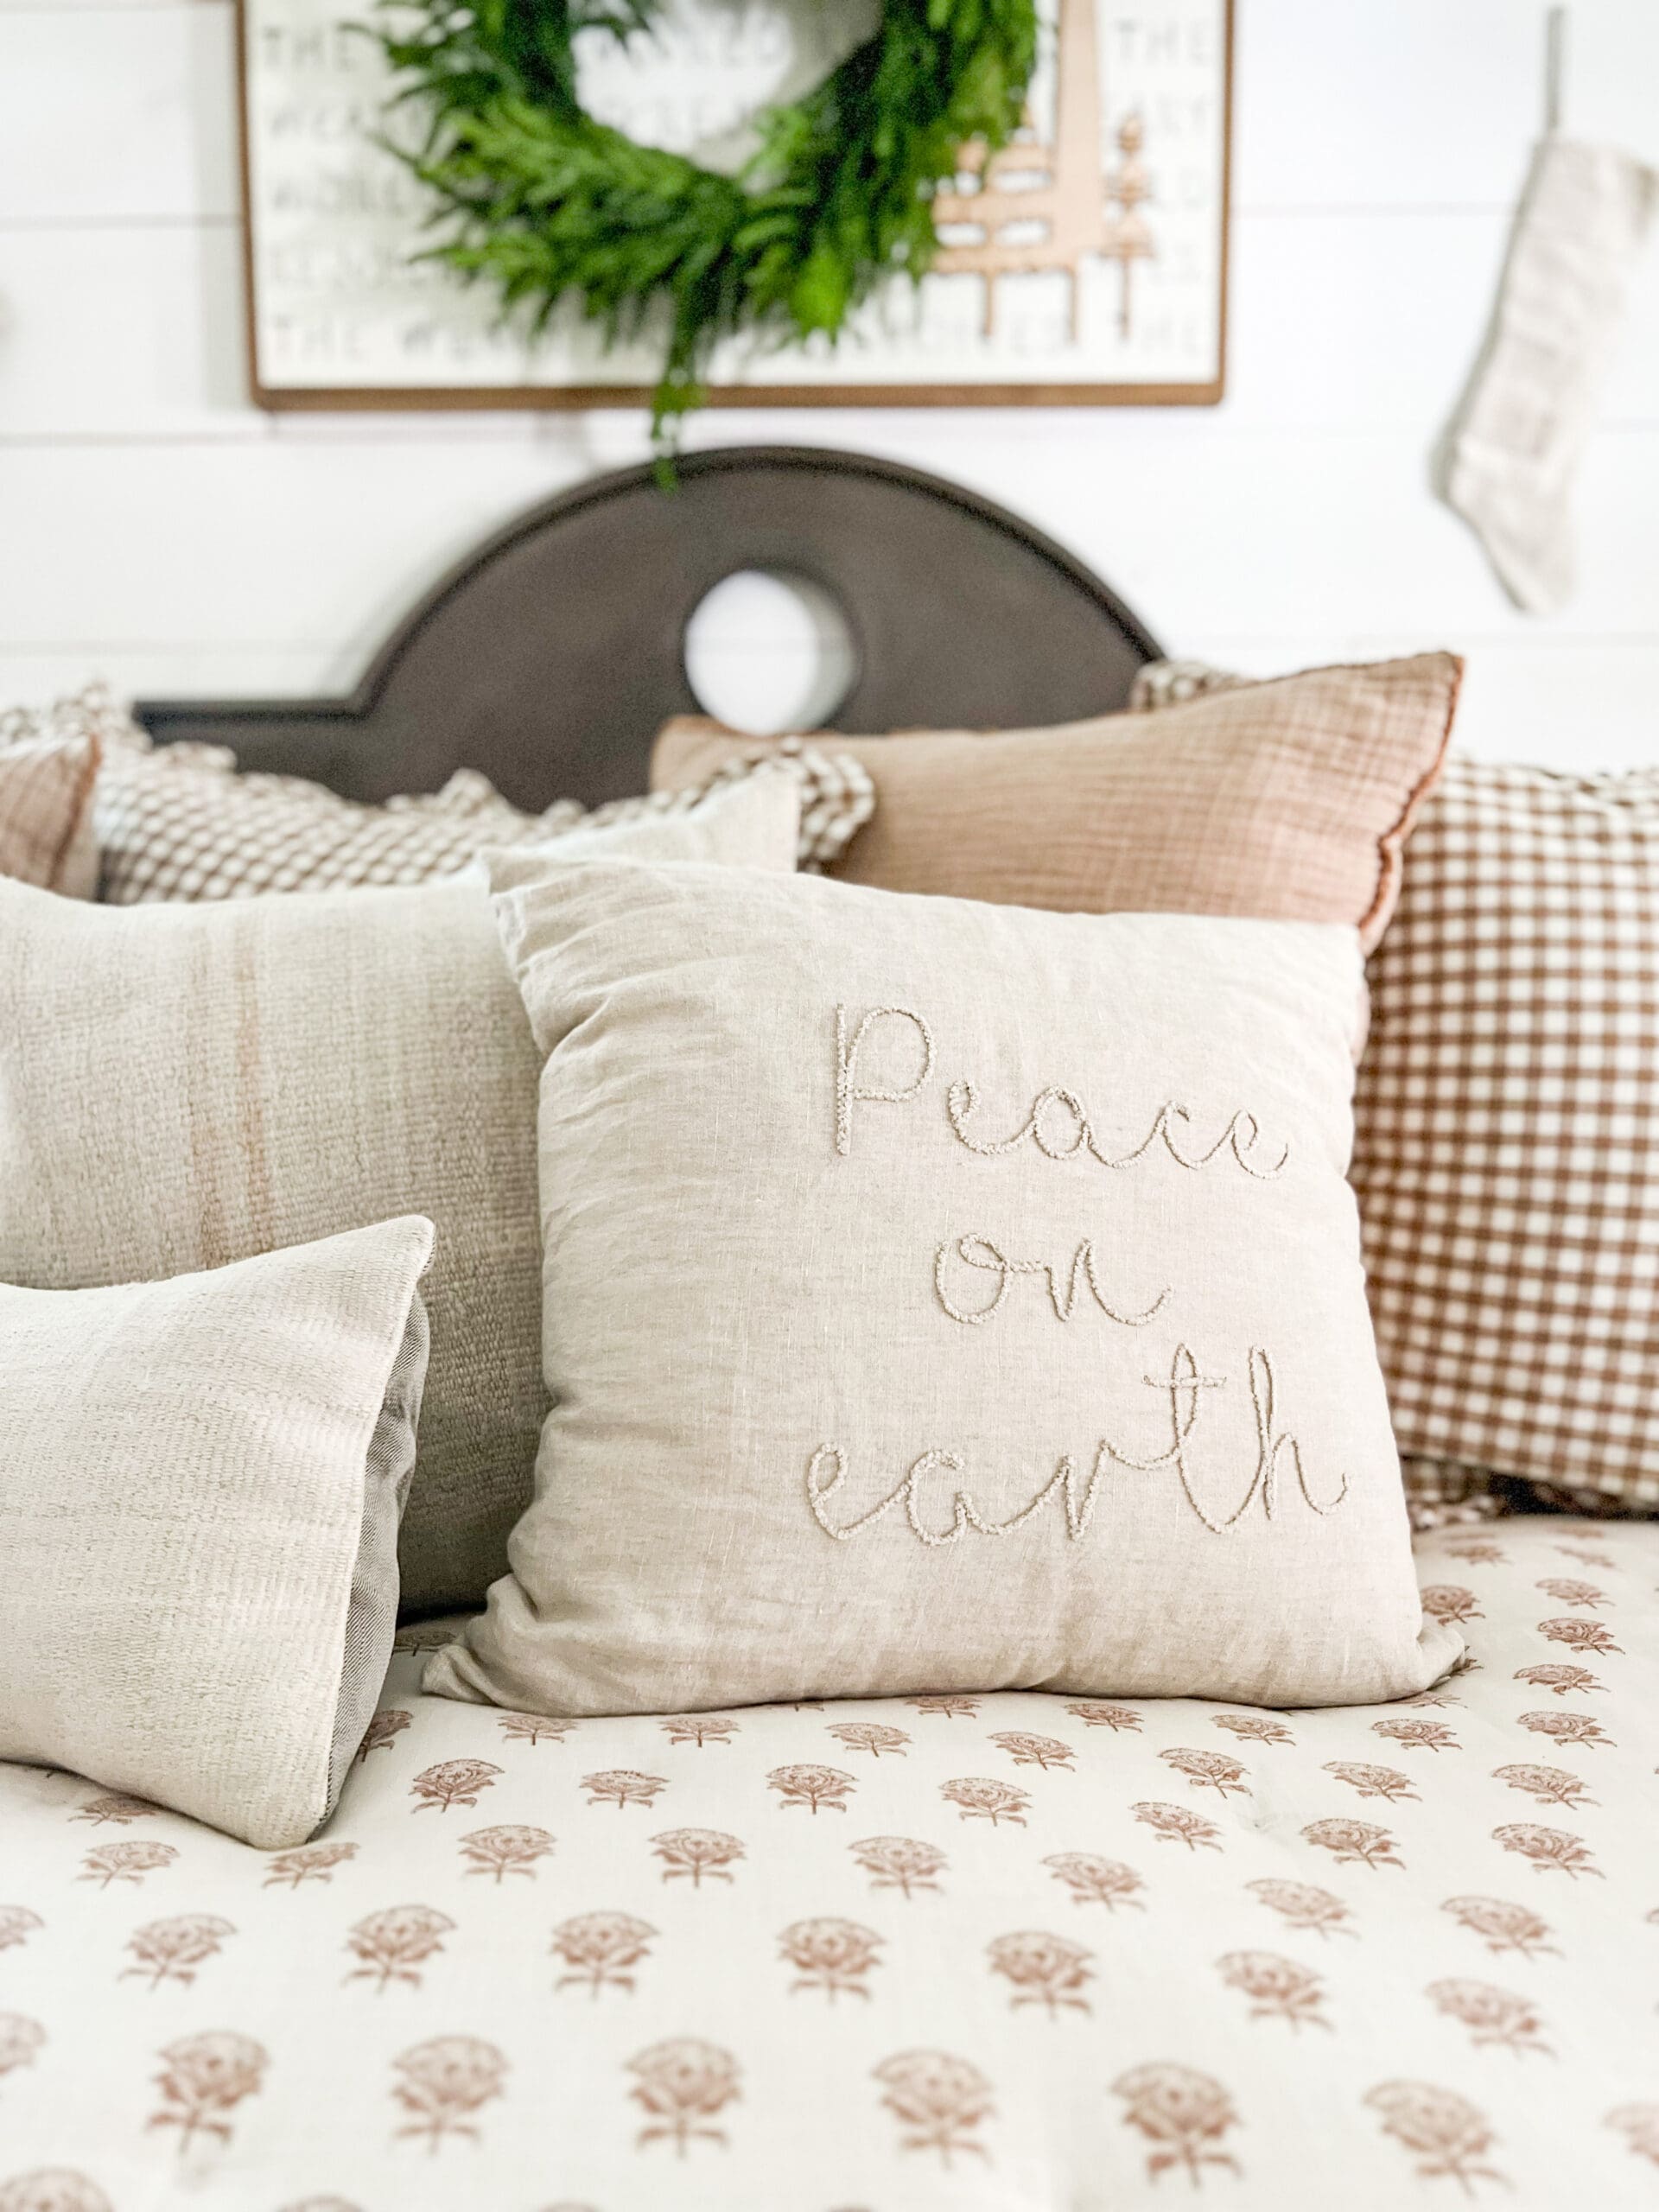 neutral pillow with the words "peace on earth" on it